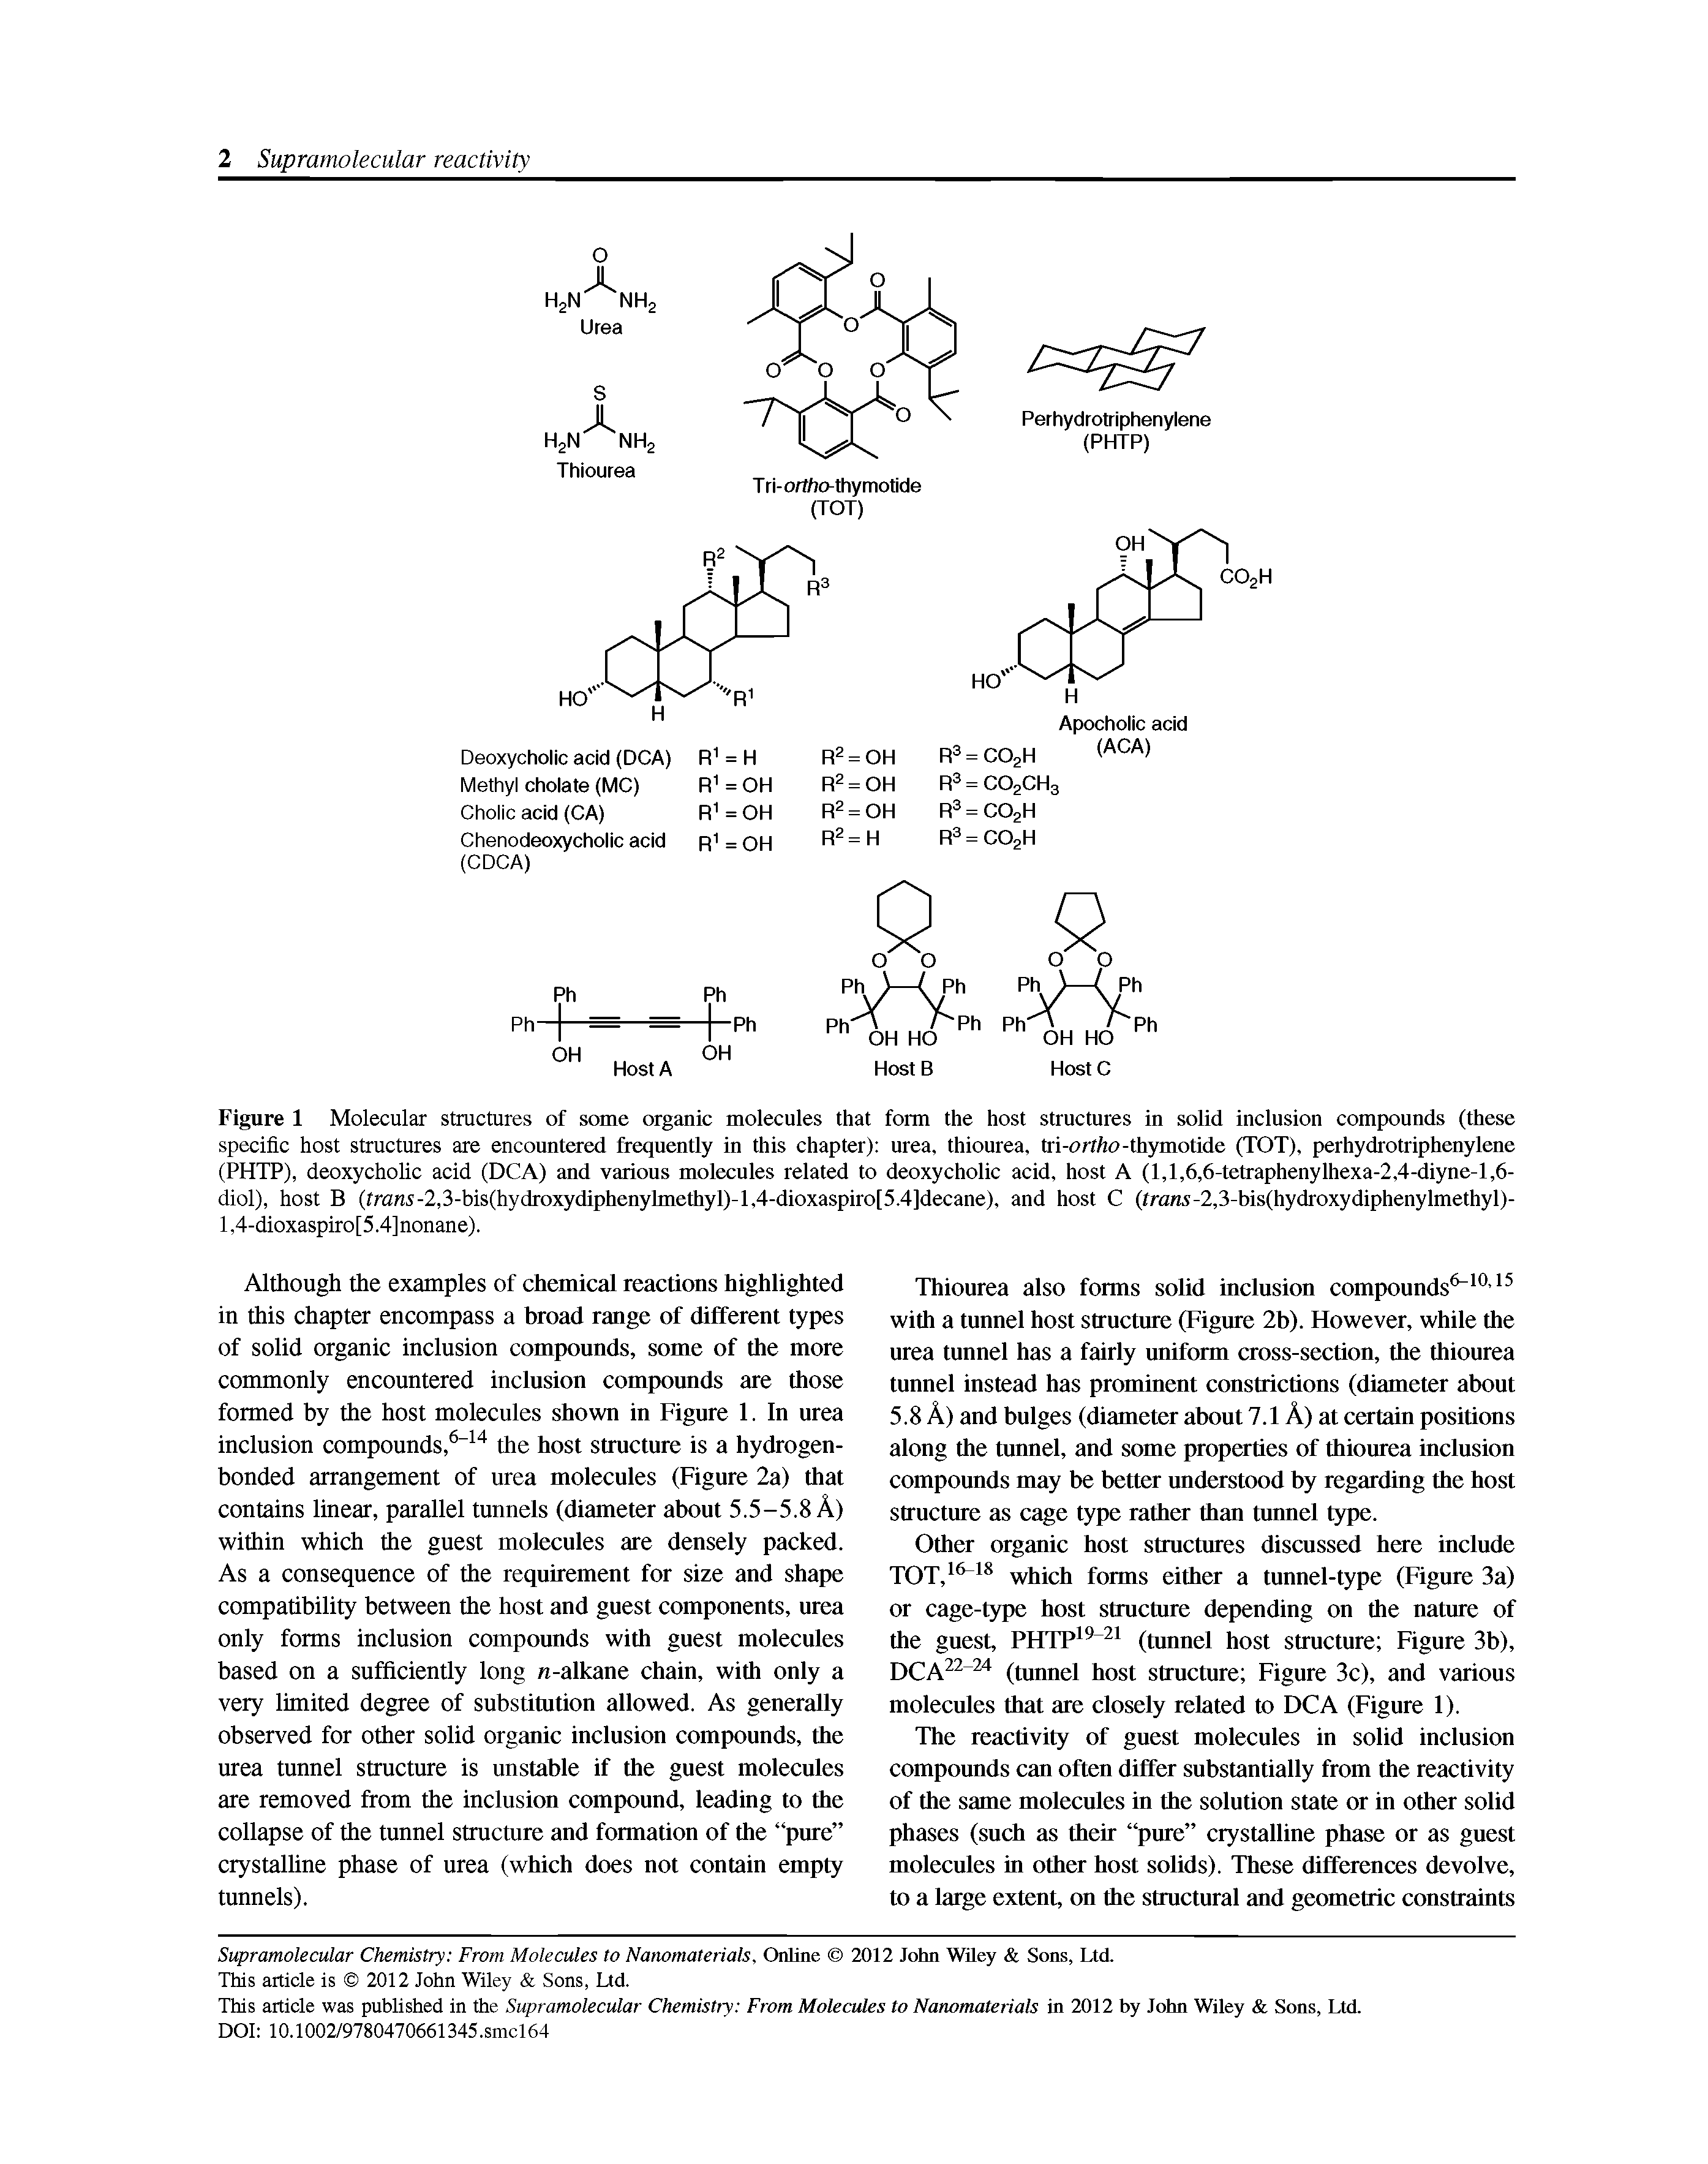 Figure 1 Molecular structures of some organic molecules that form the host structures in solid inclusion compounds (these specific host structures are encountered freqnently in this chapter) urea, thiourea, tri-orfto-thymotide (TOT), perhydrotriphenylene (PHTP), deoxycholic acid (DCA) and varions molecules related to deoxycholic acid, host A (l,l,6,6-tetraphenylhexa-2,4-diyne-l,6-diol), host B (frans-2,3-bis(hydroxydiphenylmethyl)-l,4-dioxaspiro[5.4]decane), and host C (irans-2,3-bis(hydroxydiphenylmethyl)-l,4-dioxaspiro[5.4]nonane).